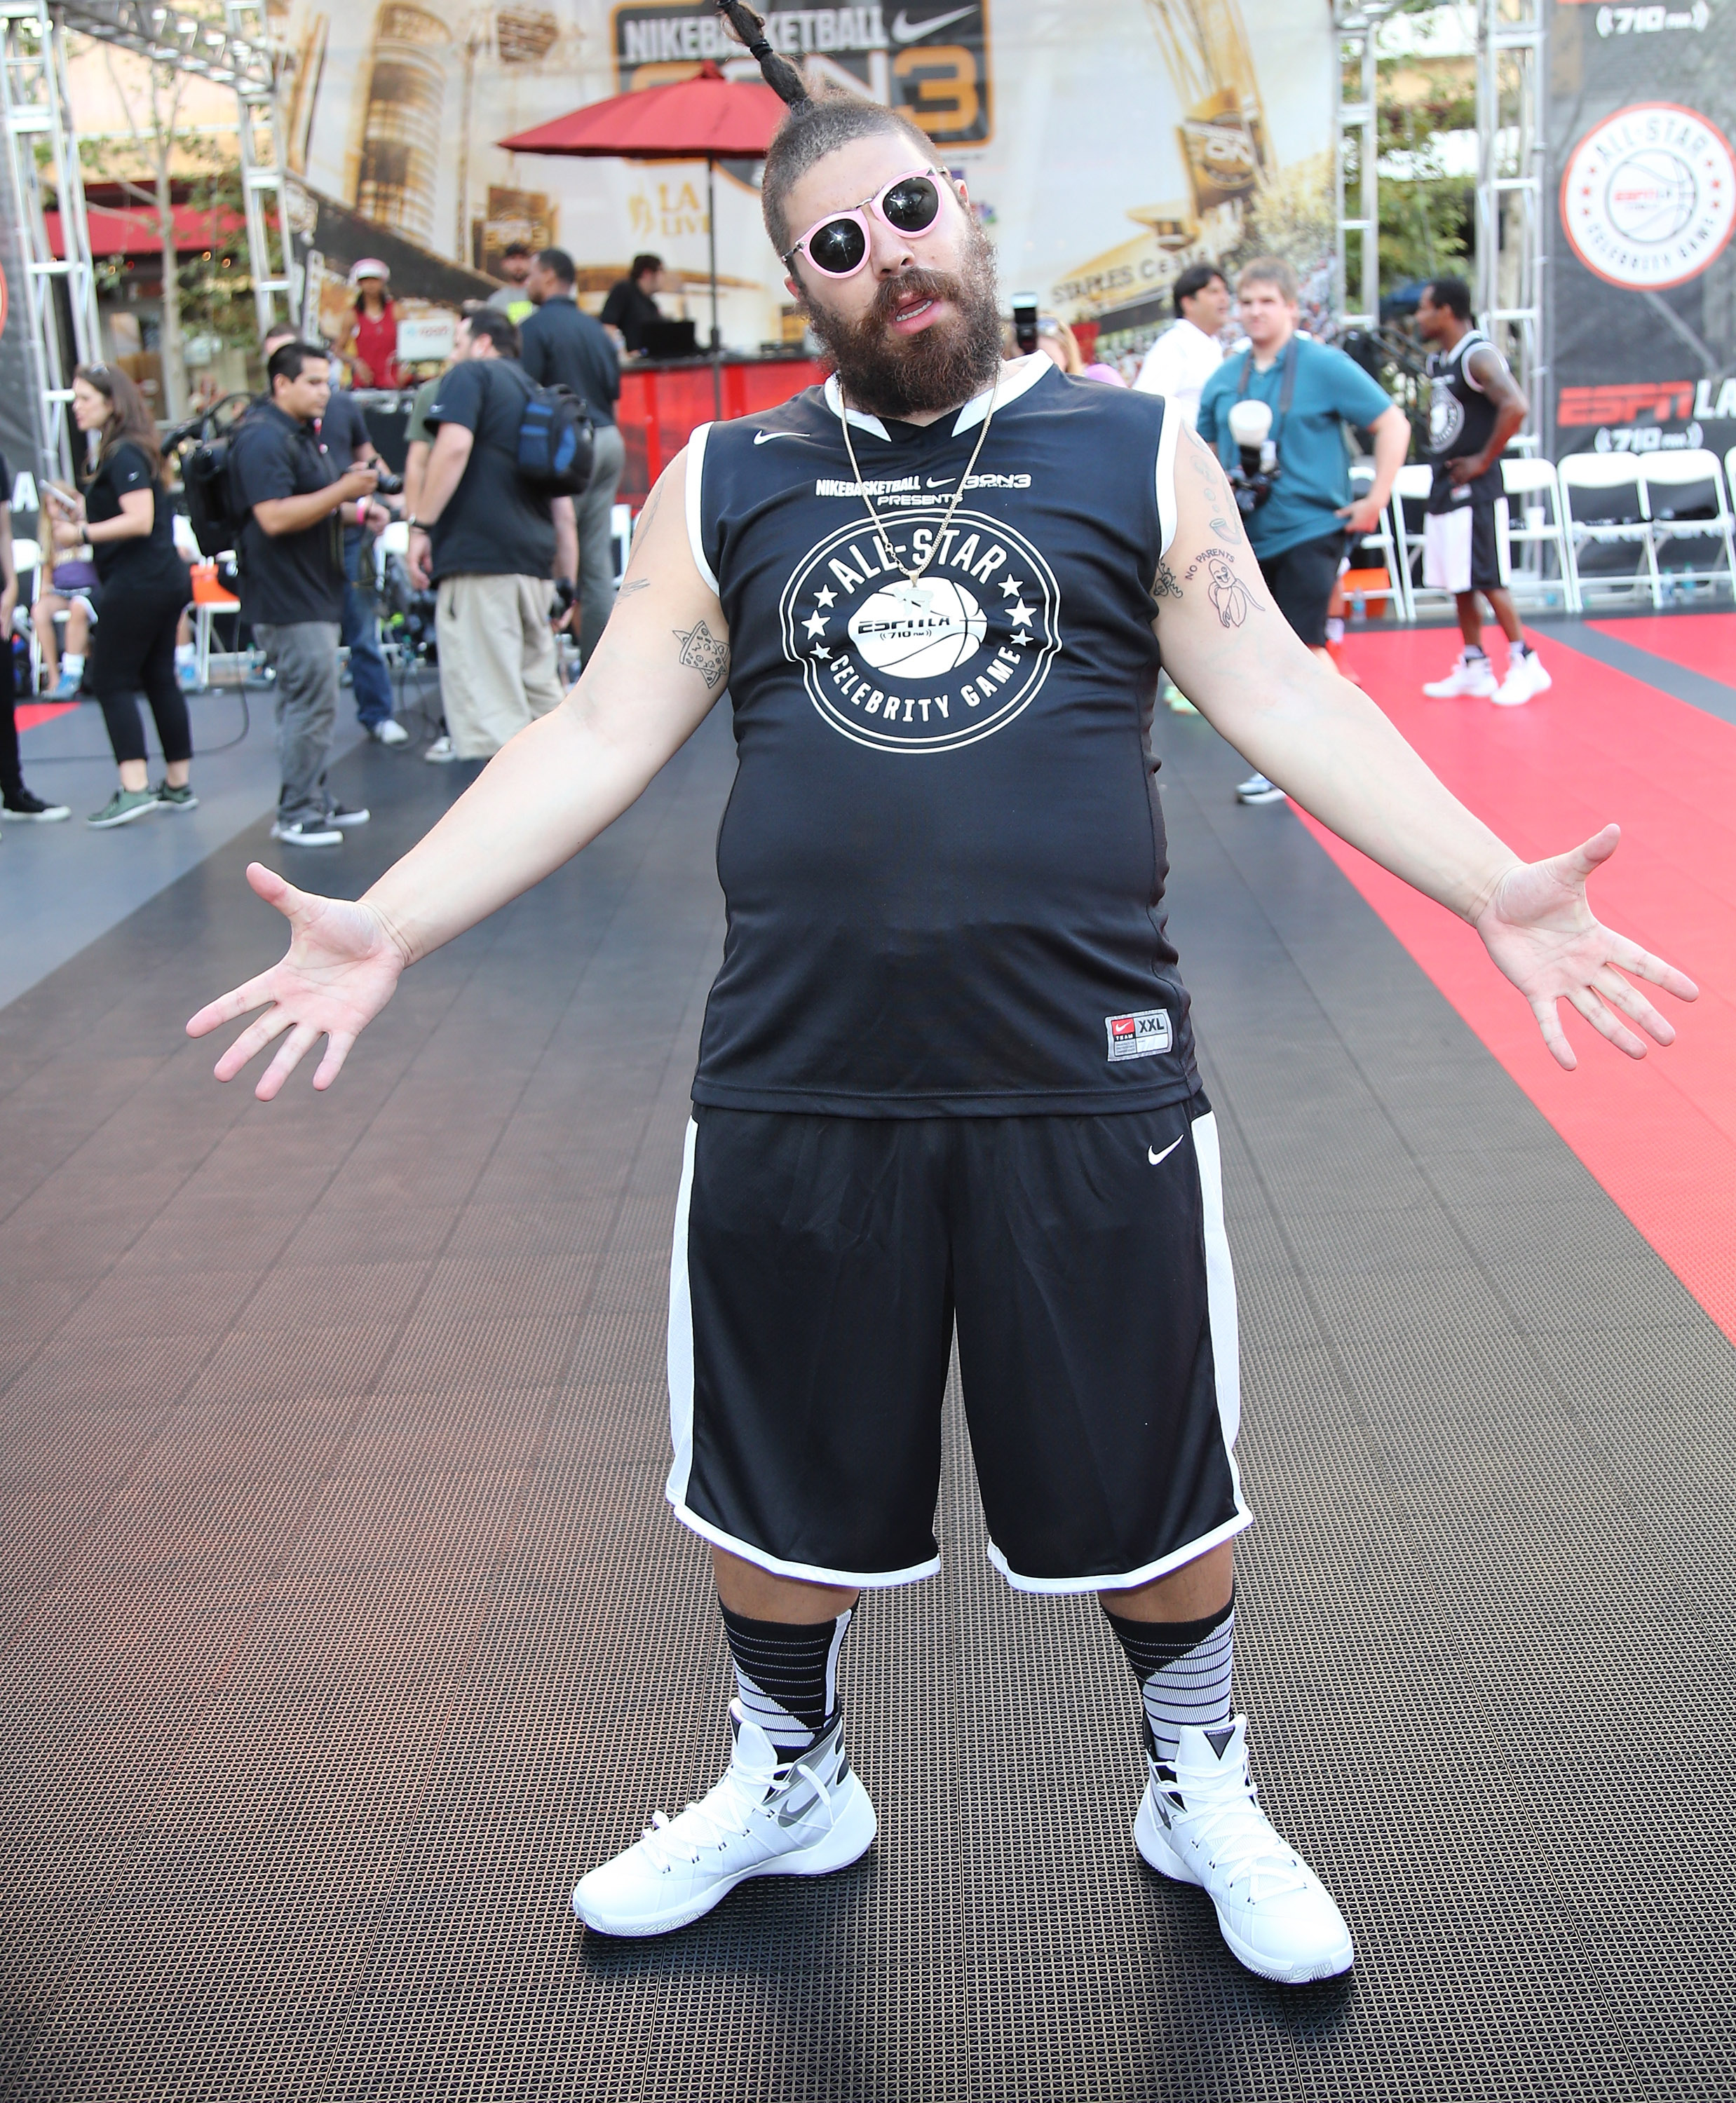 Josh "The Fat Jew" Ostrovsky at the 2015 Nike Basketball 3ON3 Tournament on Aug. 7, 2015 in Los Angeles. (David Livingston—Getty Images)